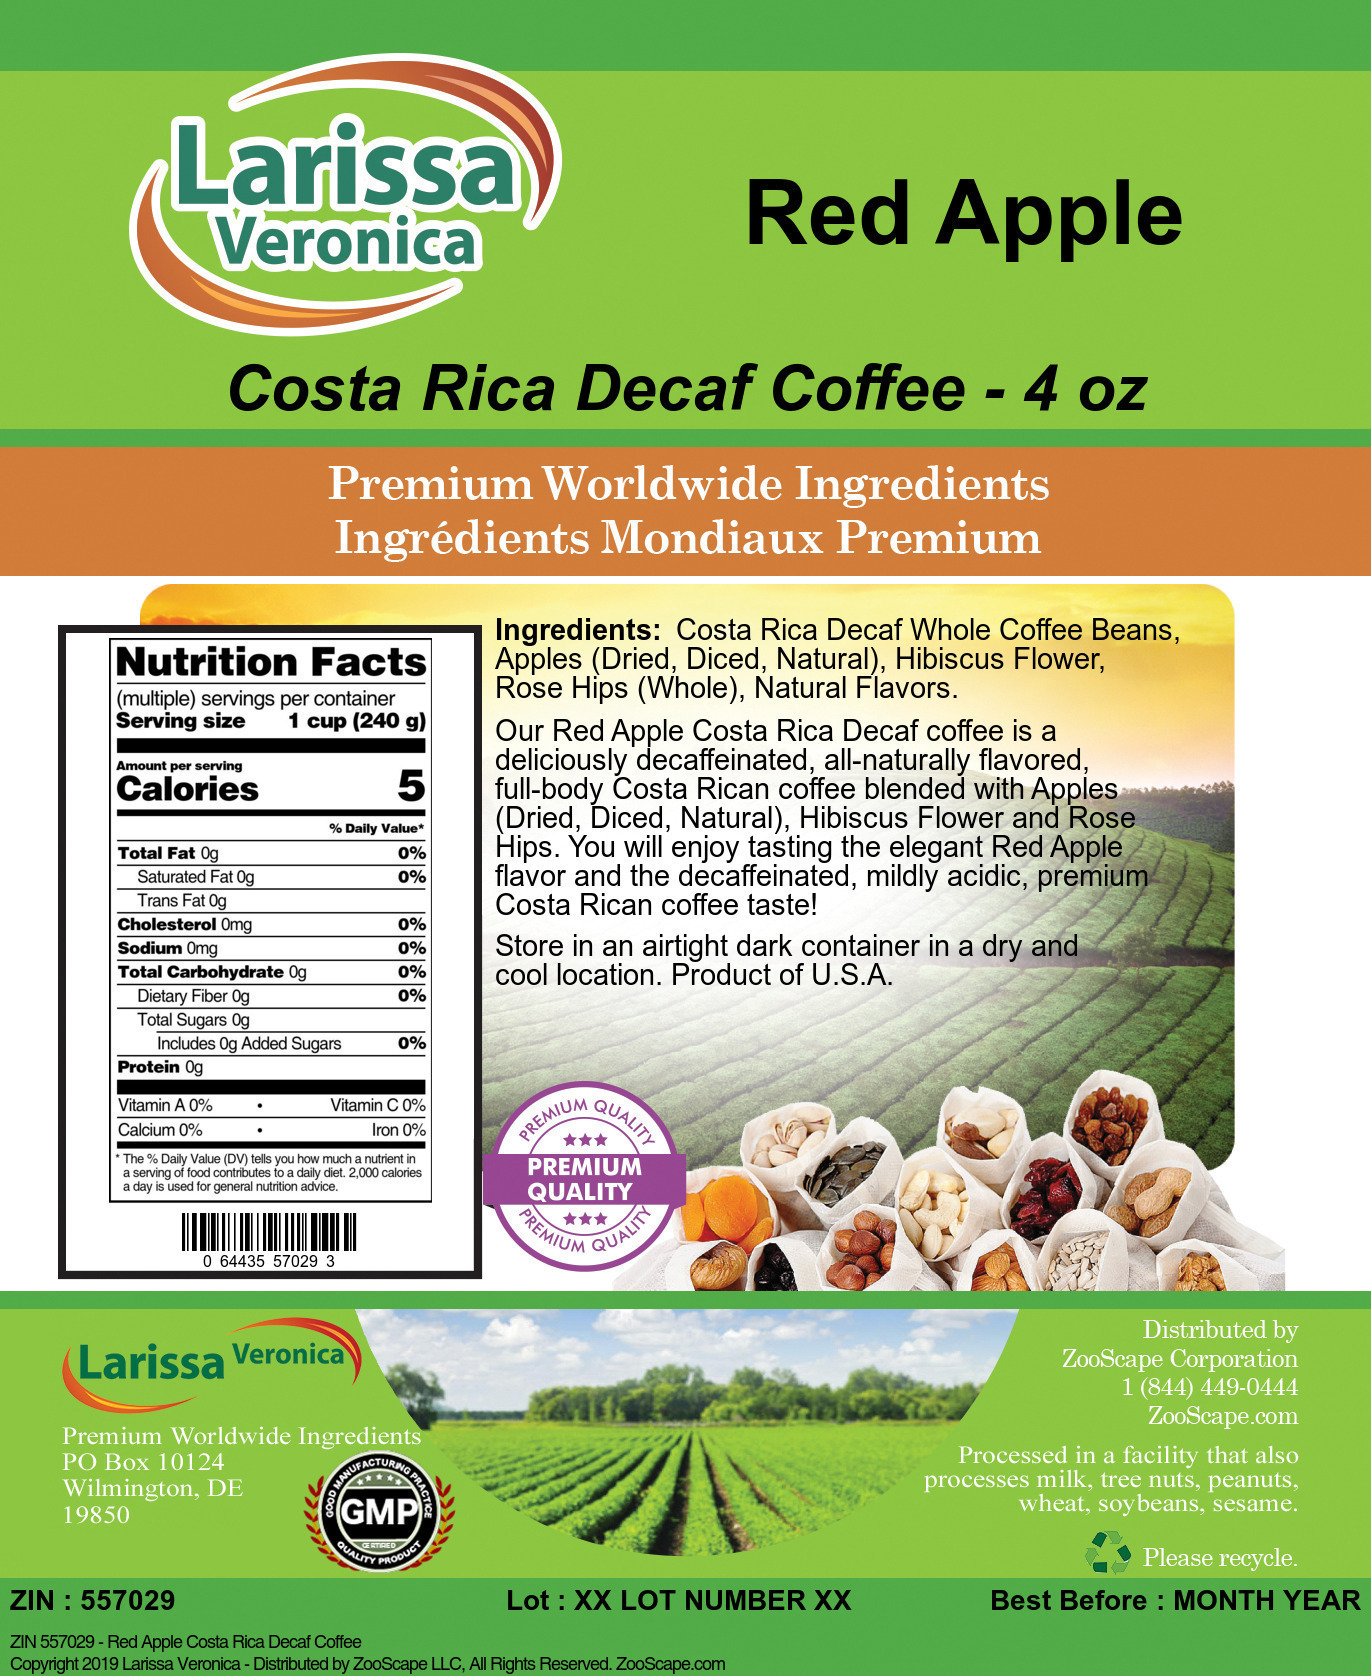 Red Apple Costa Rica Decaf Coffee - Label